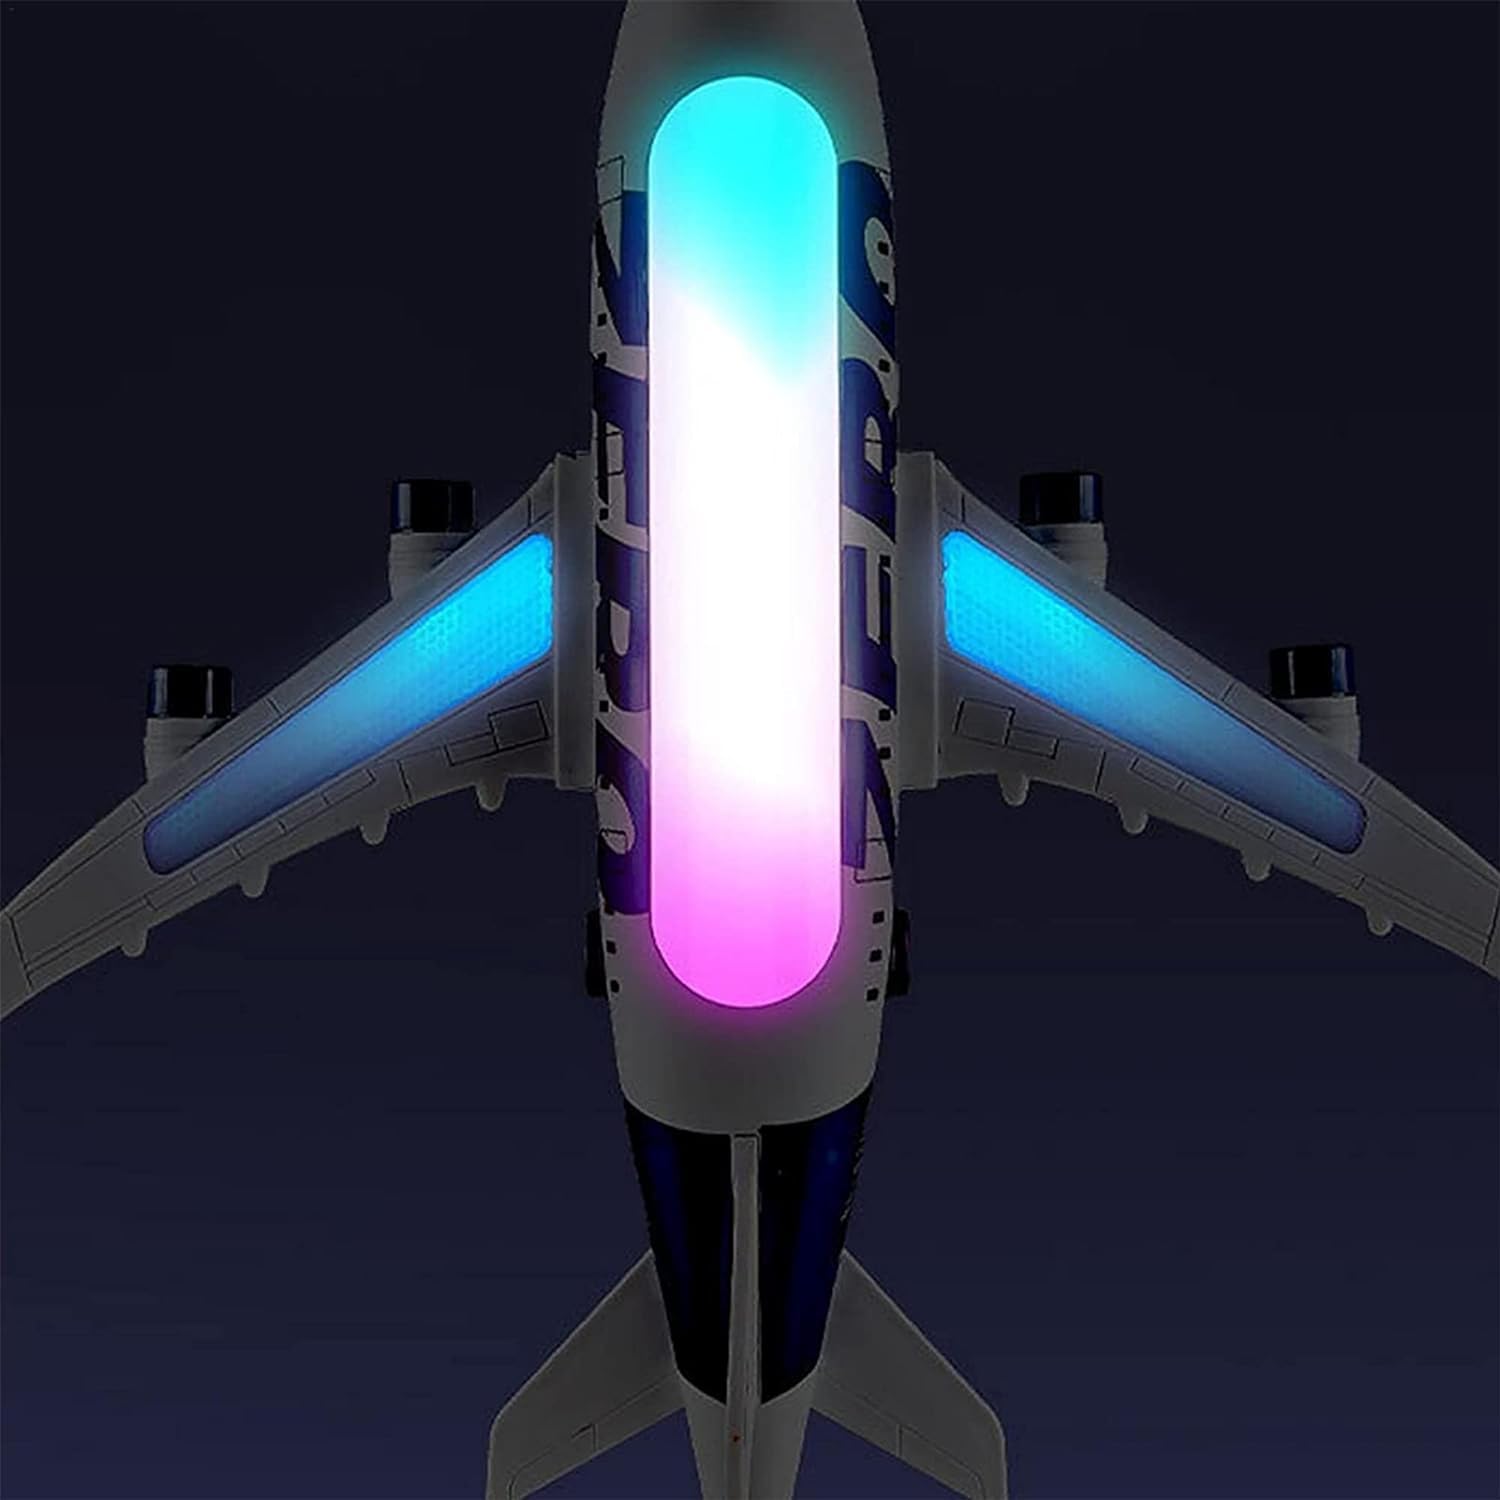 Braintastic Zero Aircraft Electric Stimulated with 360 Degree Rotation and Flashing Light Airplane Toy for Kids